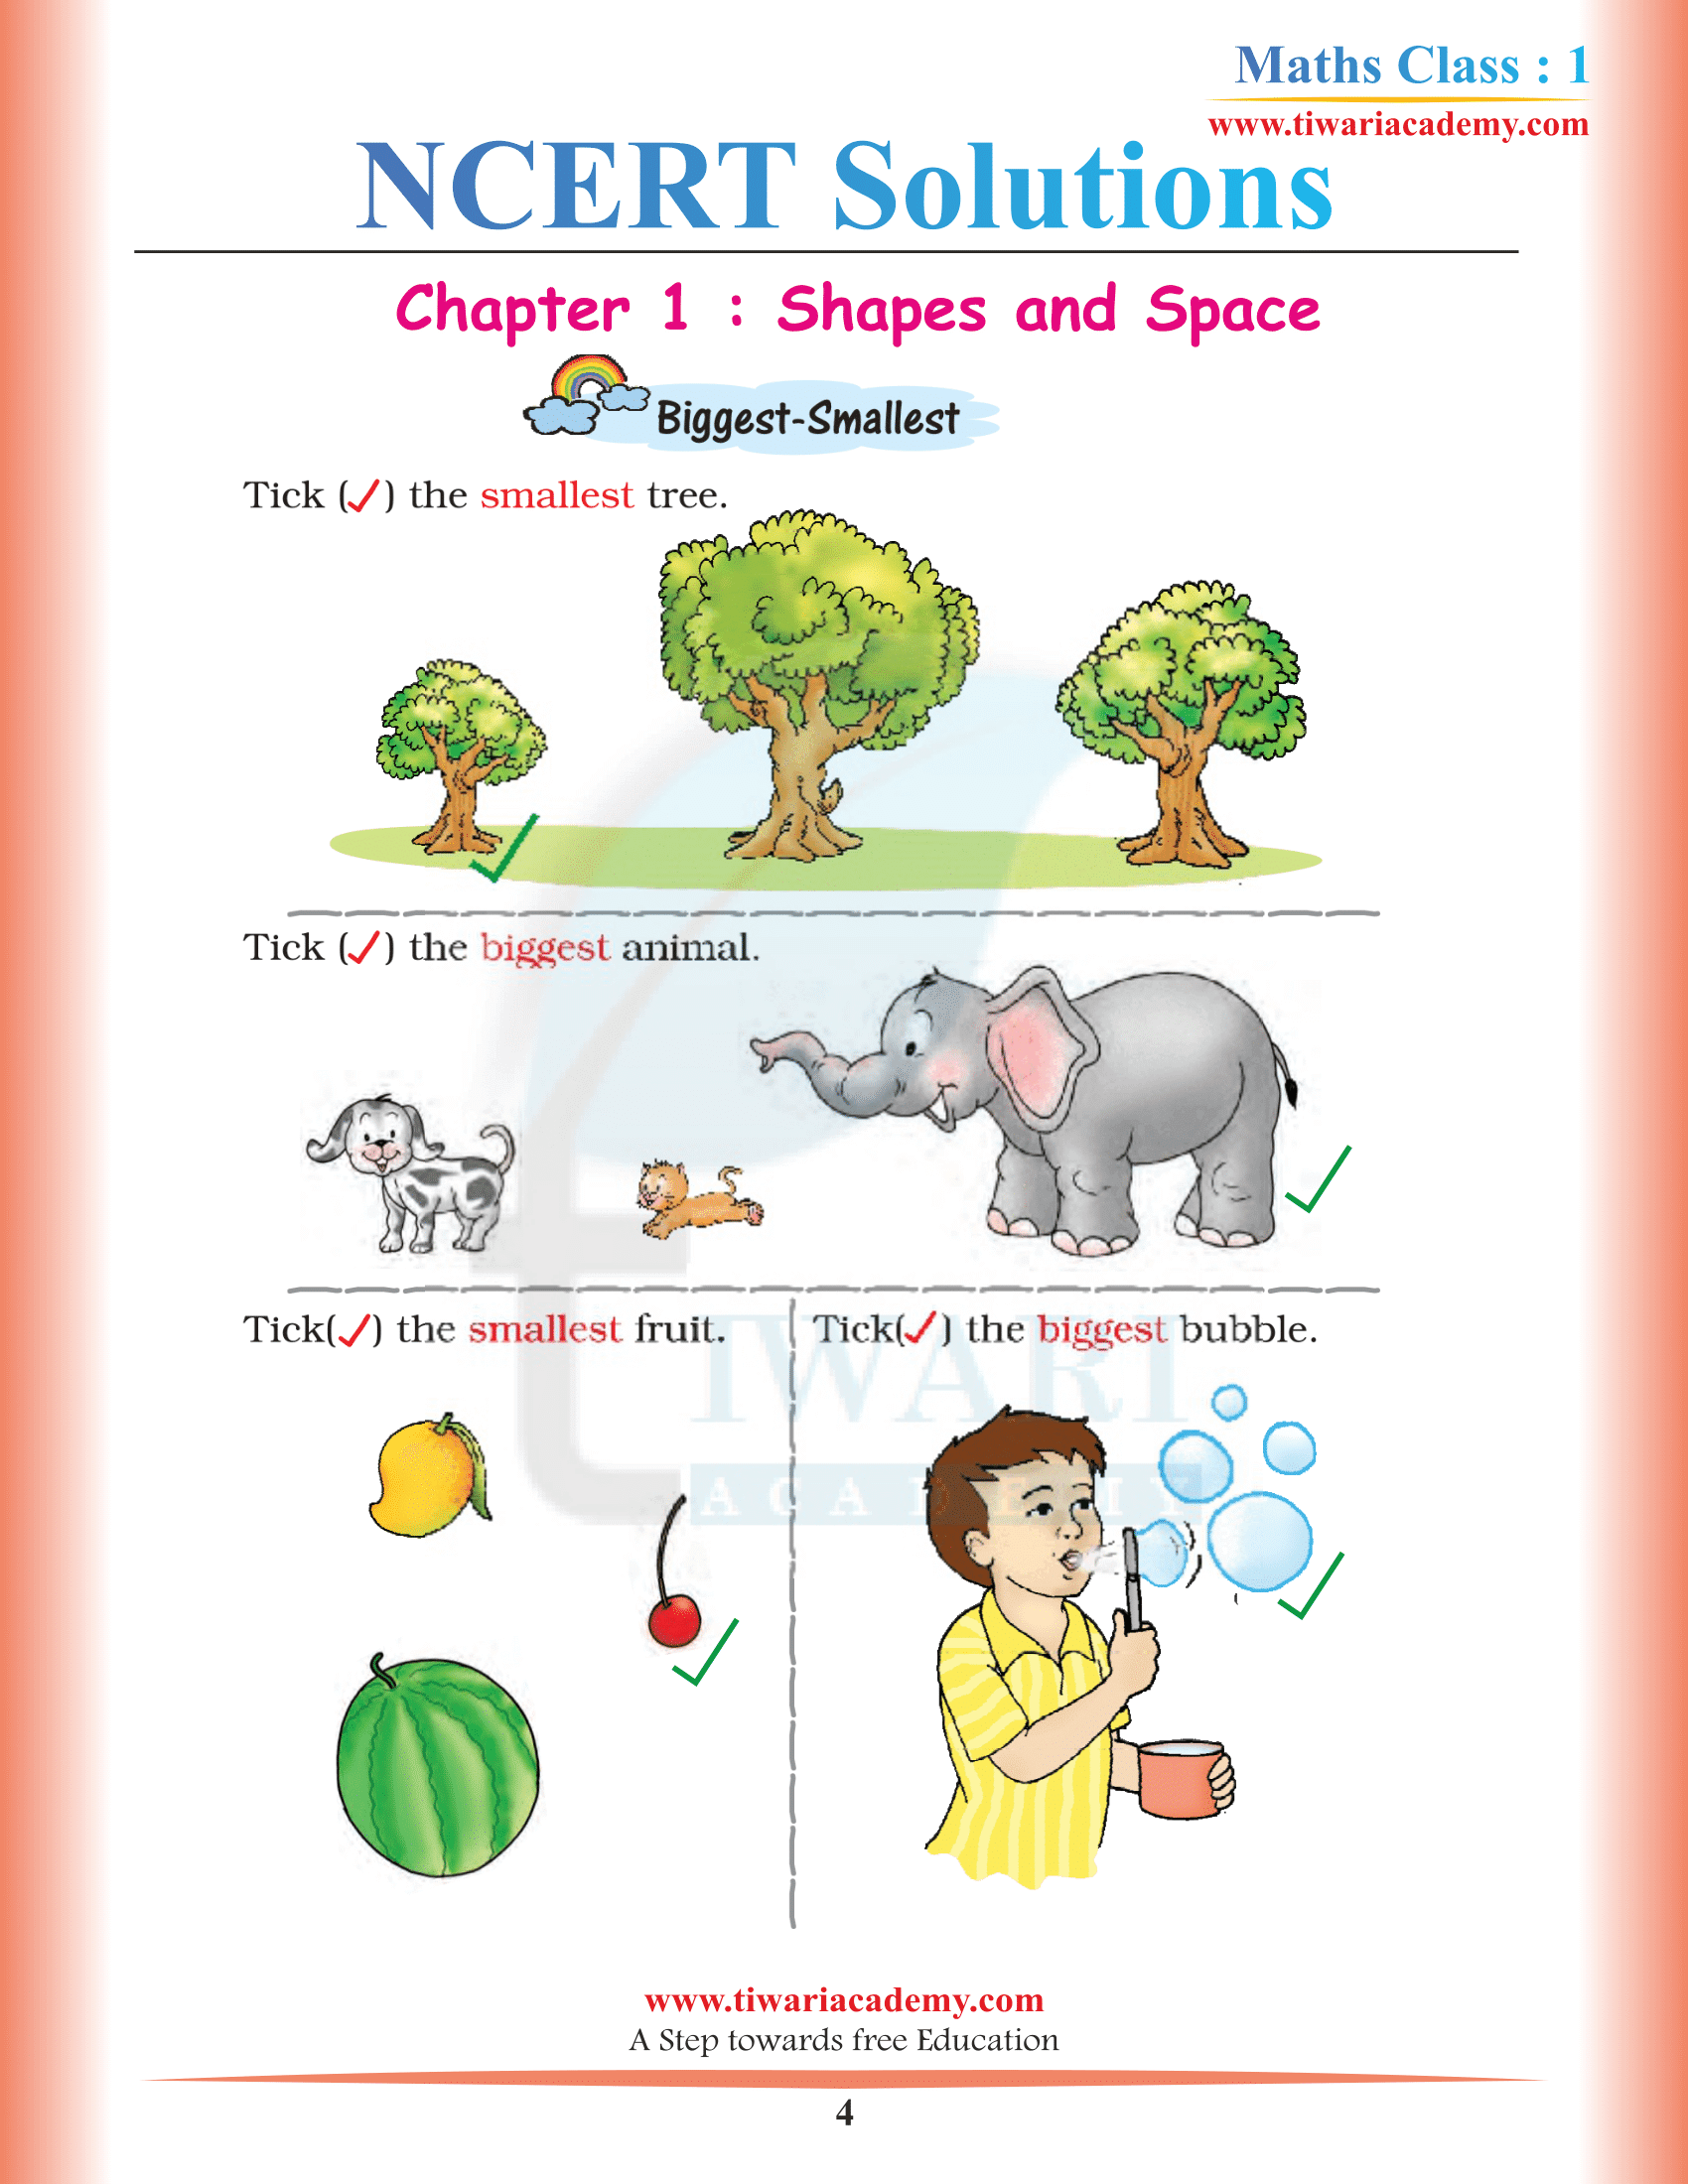 Maths for Class 1 Shapes an Space